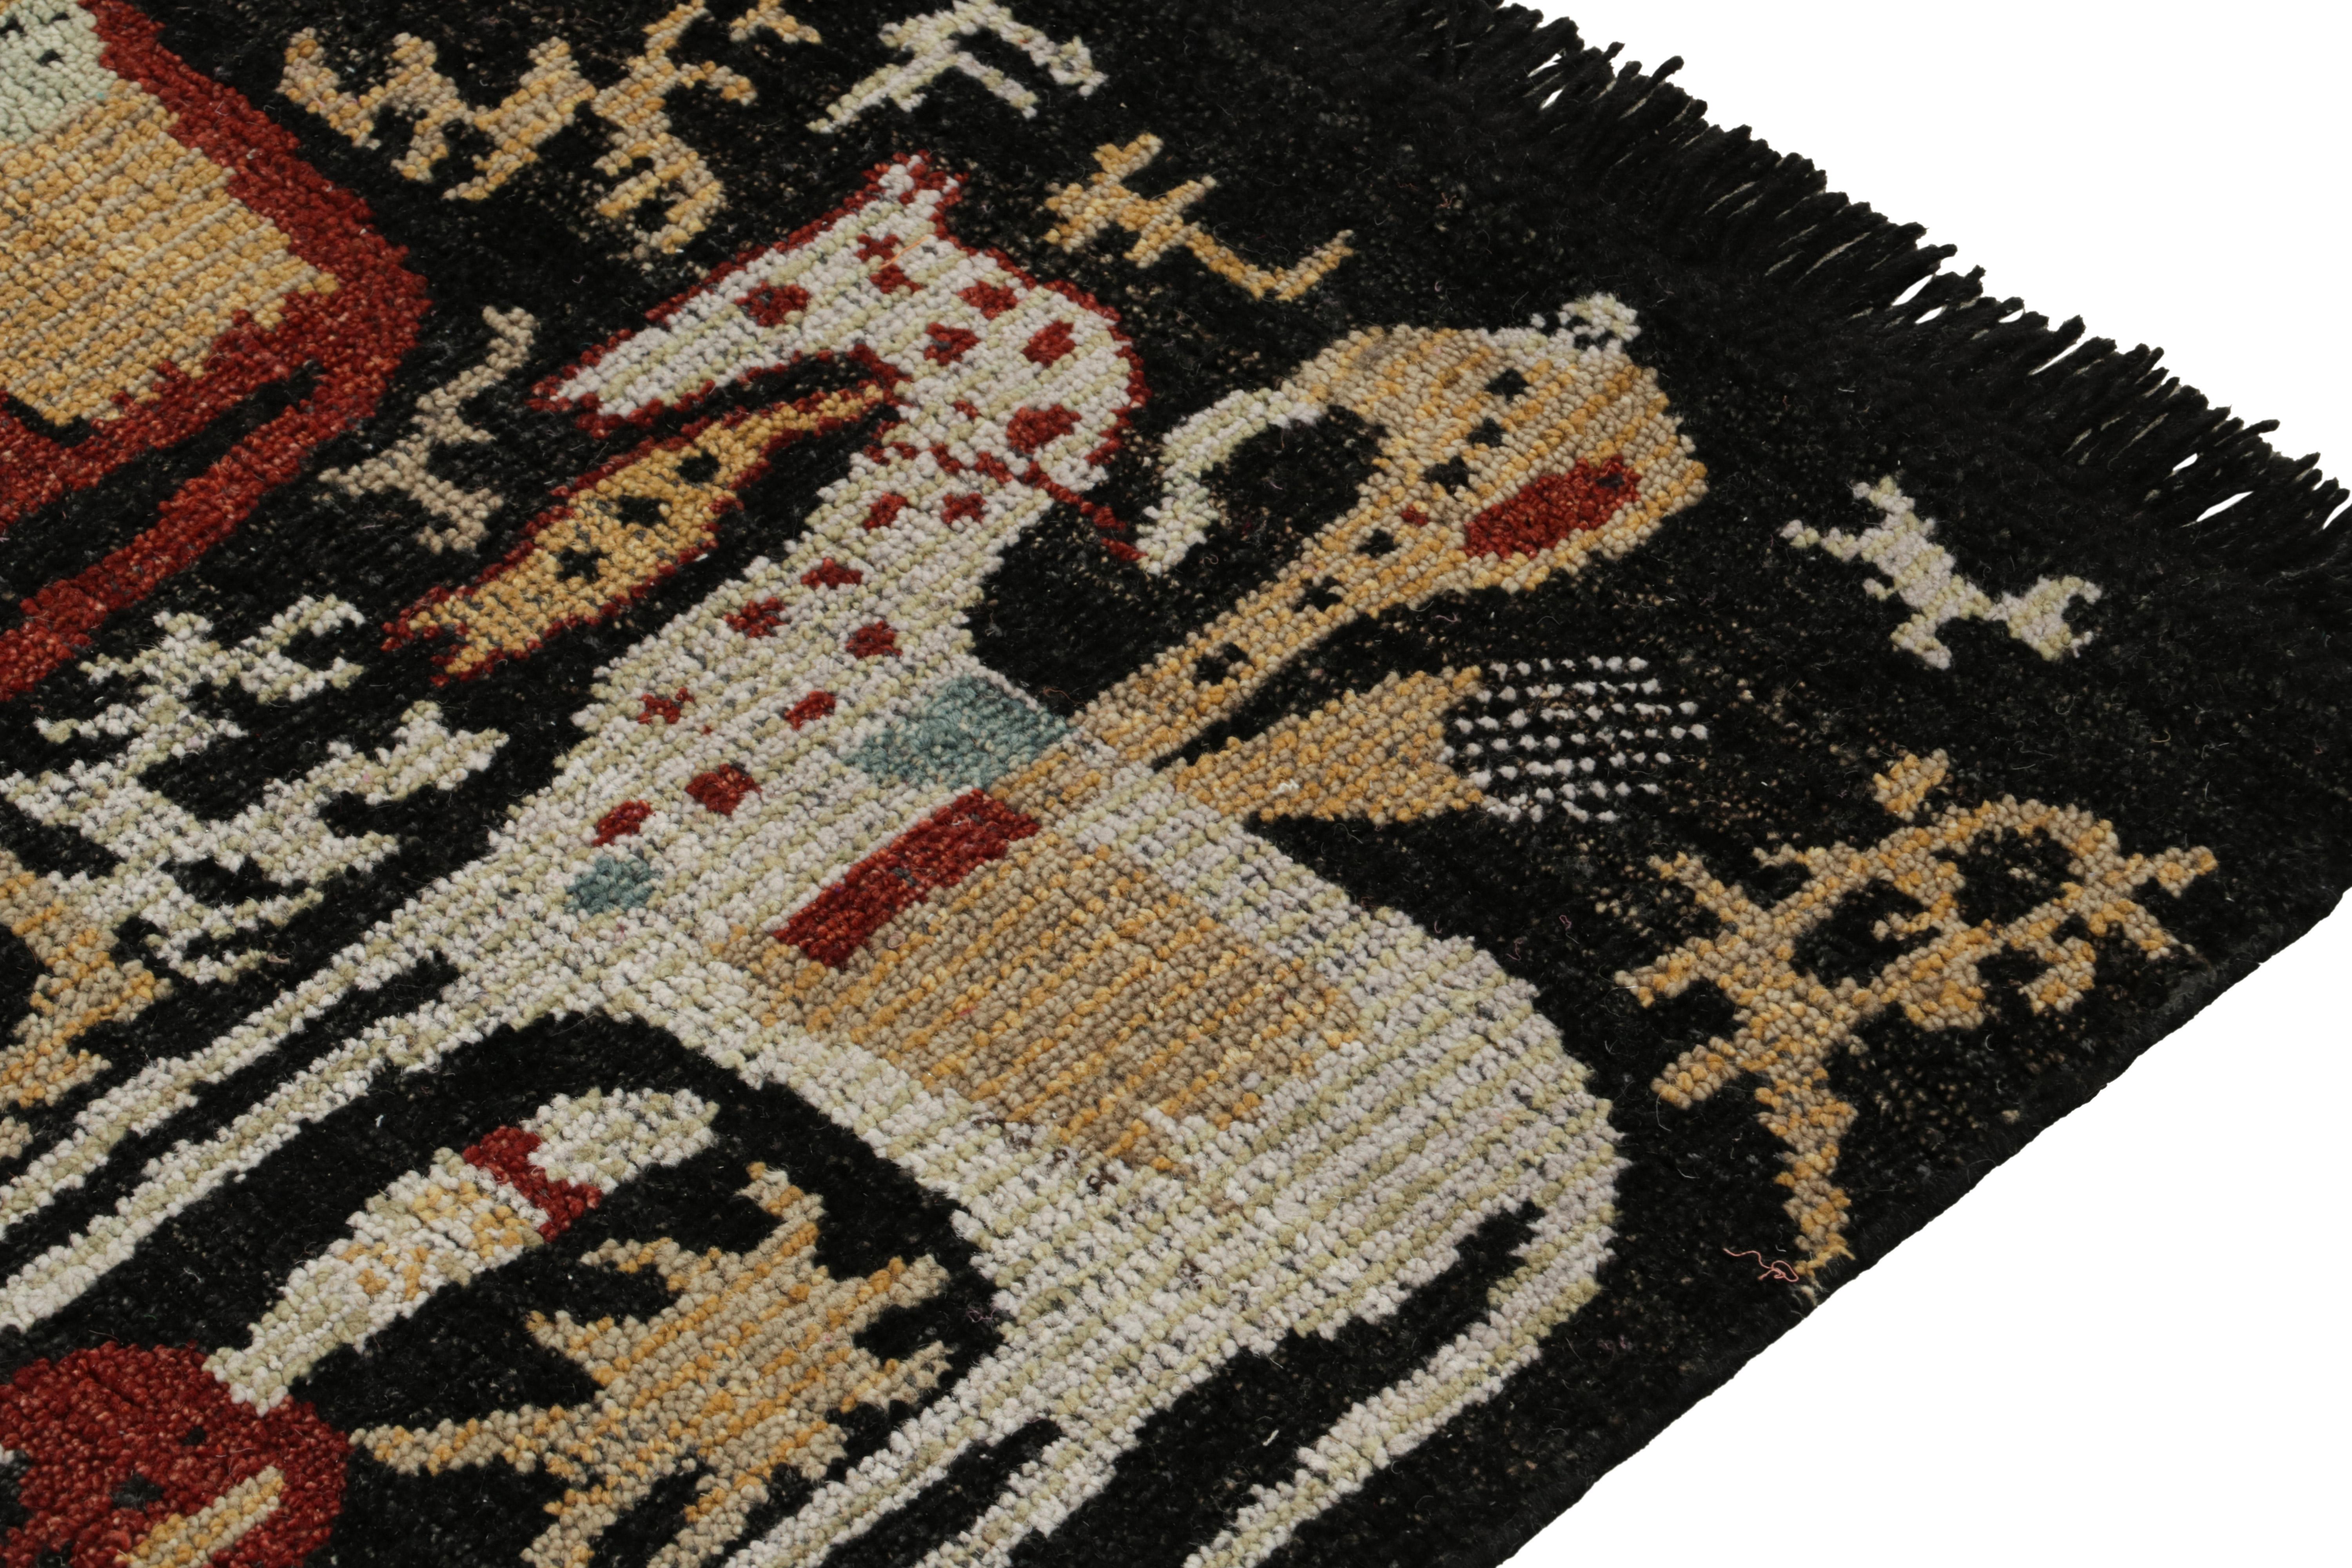 Rug & Kilim's Tribal Style Rug in Black, Red and White Pictorial Pattern In New Condition For Sale In Long Island City, NY